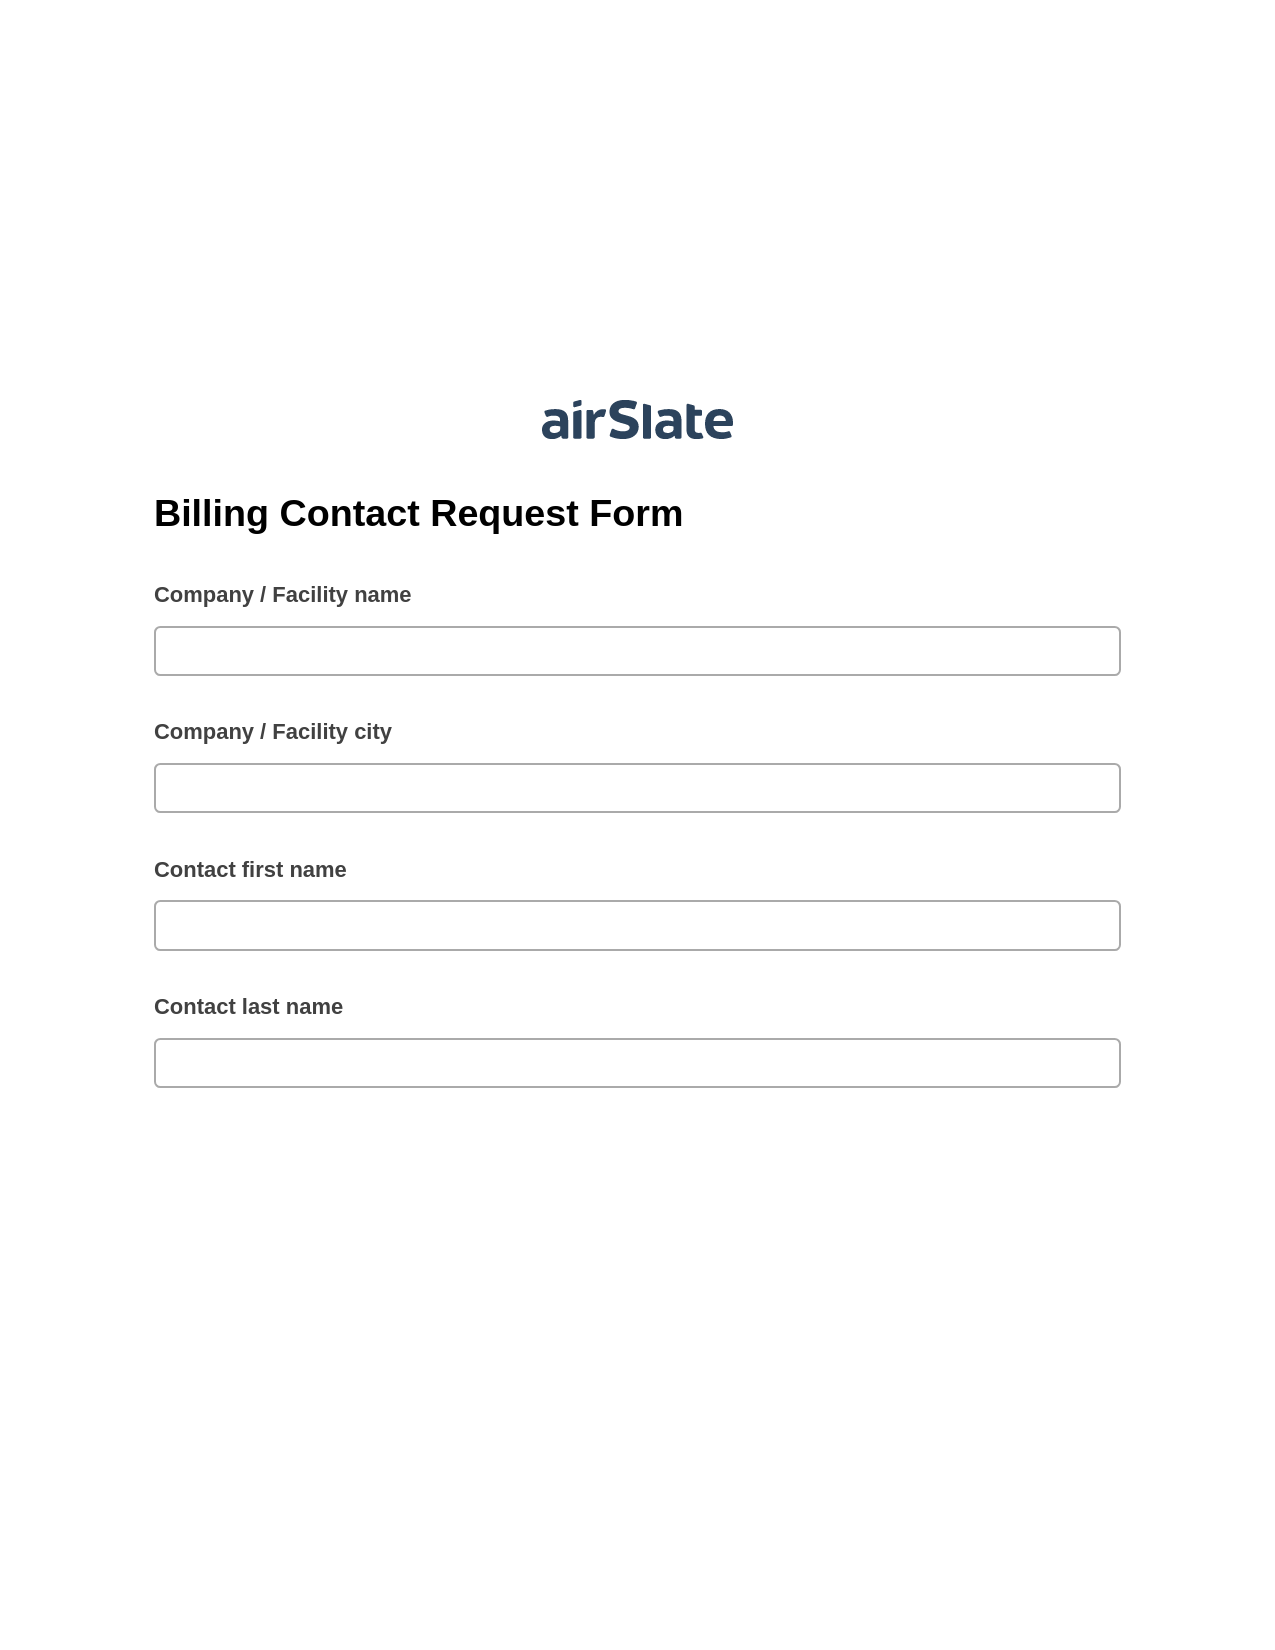 Multirole Billing Contact Request Form Pre-fill Dropdowns from Smartsheet Bot, Export to MS Dynamics 365 Bot, Export to Excel 365 Bot